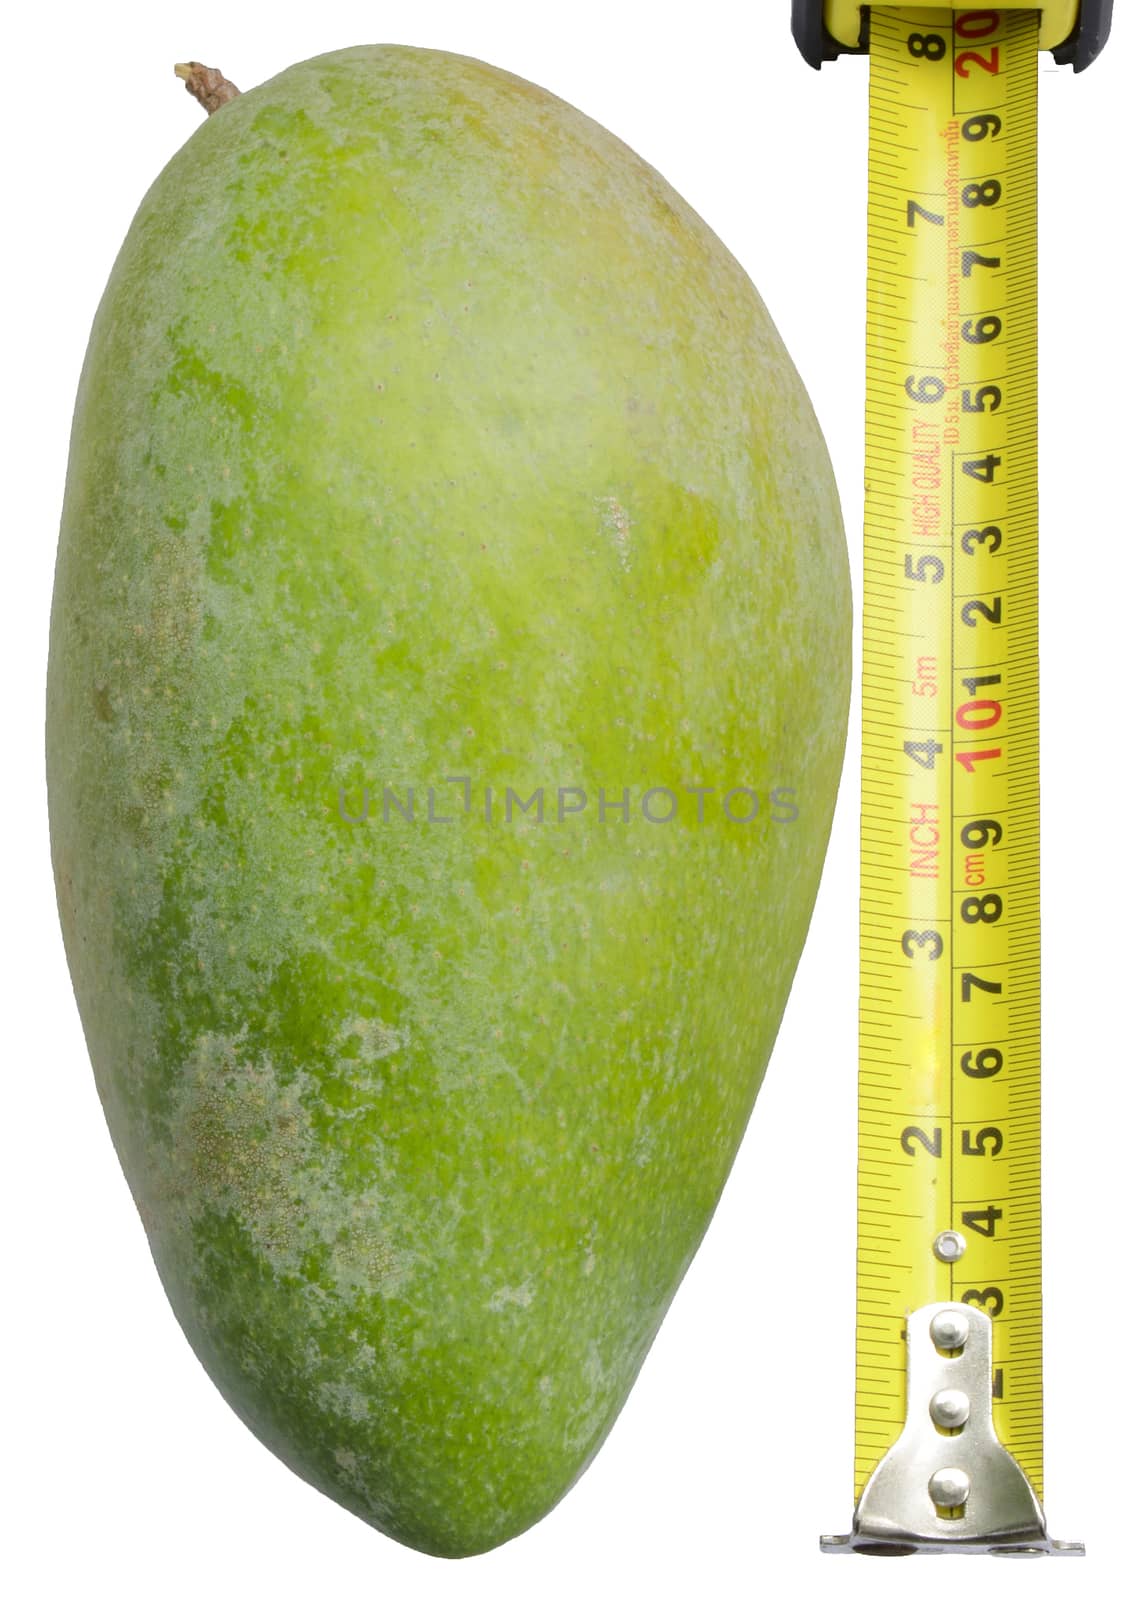 Giant Green Mongo,it's a dominant feature of this Mango.